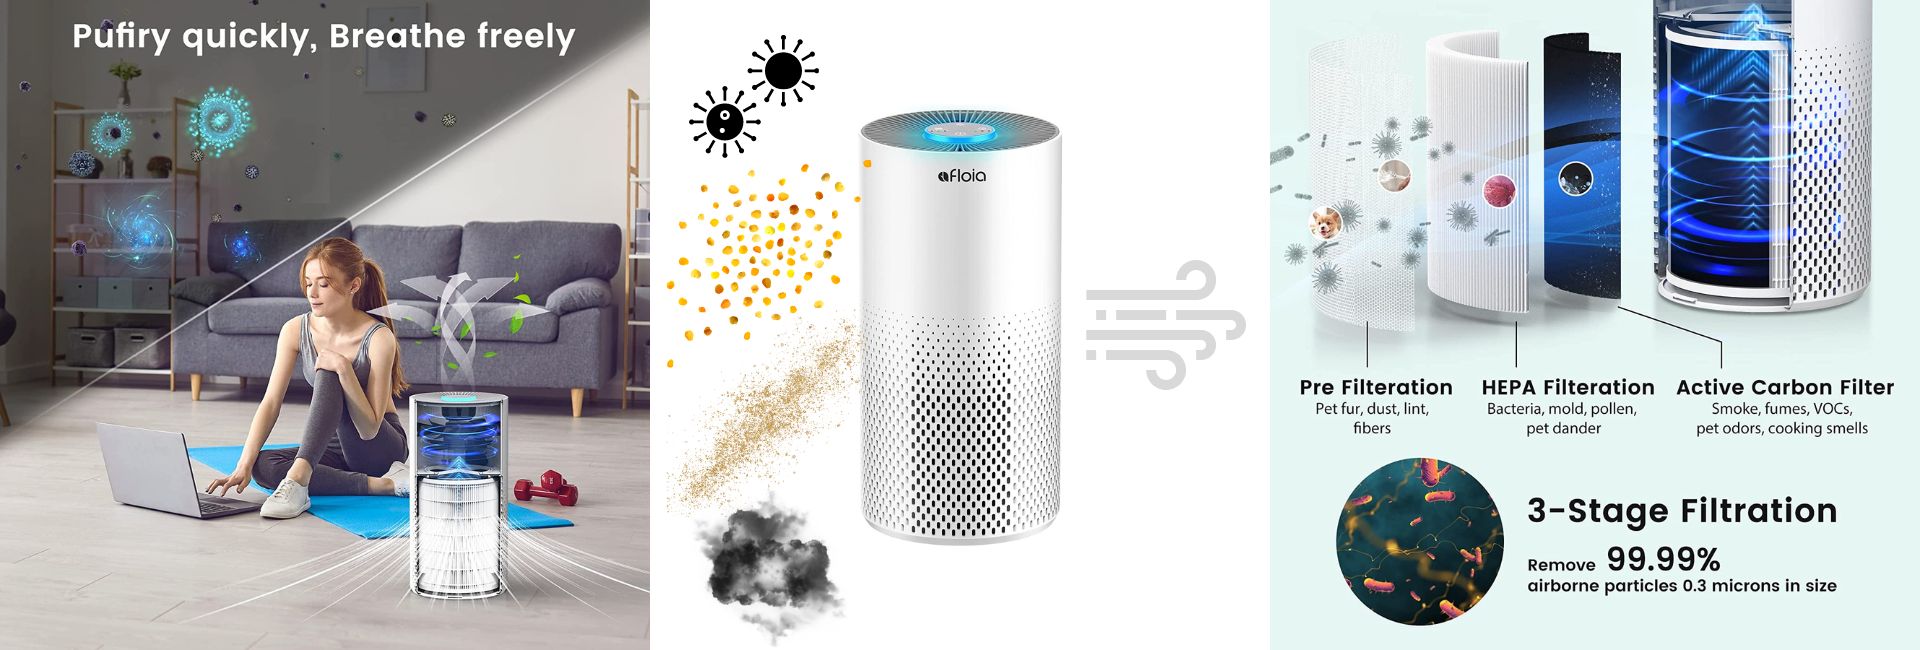 best air purifier and filter for your home